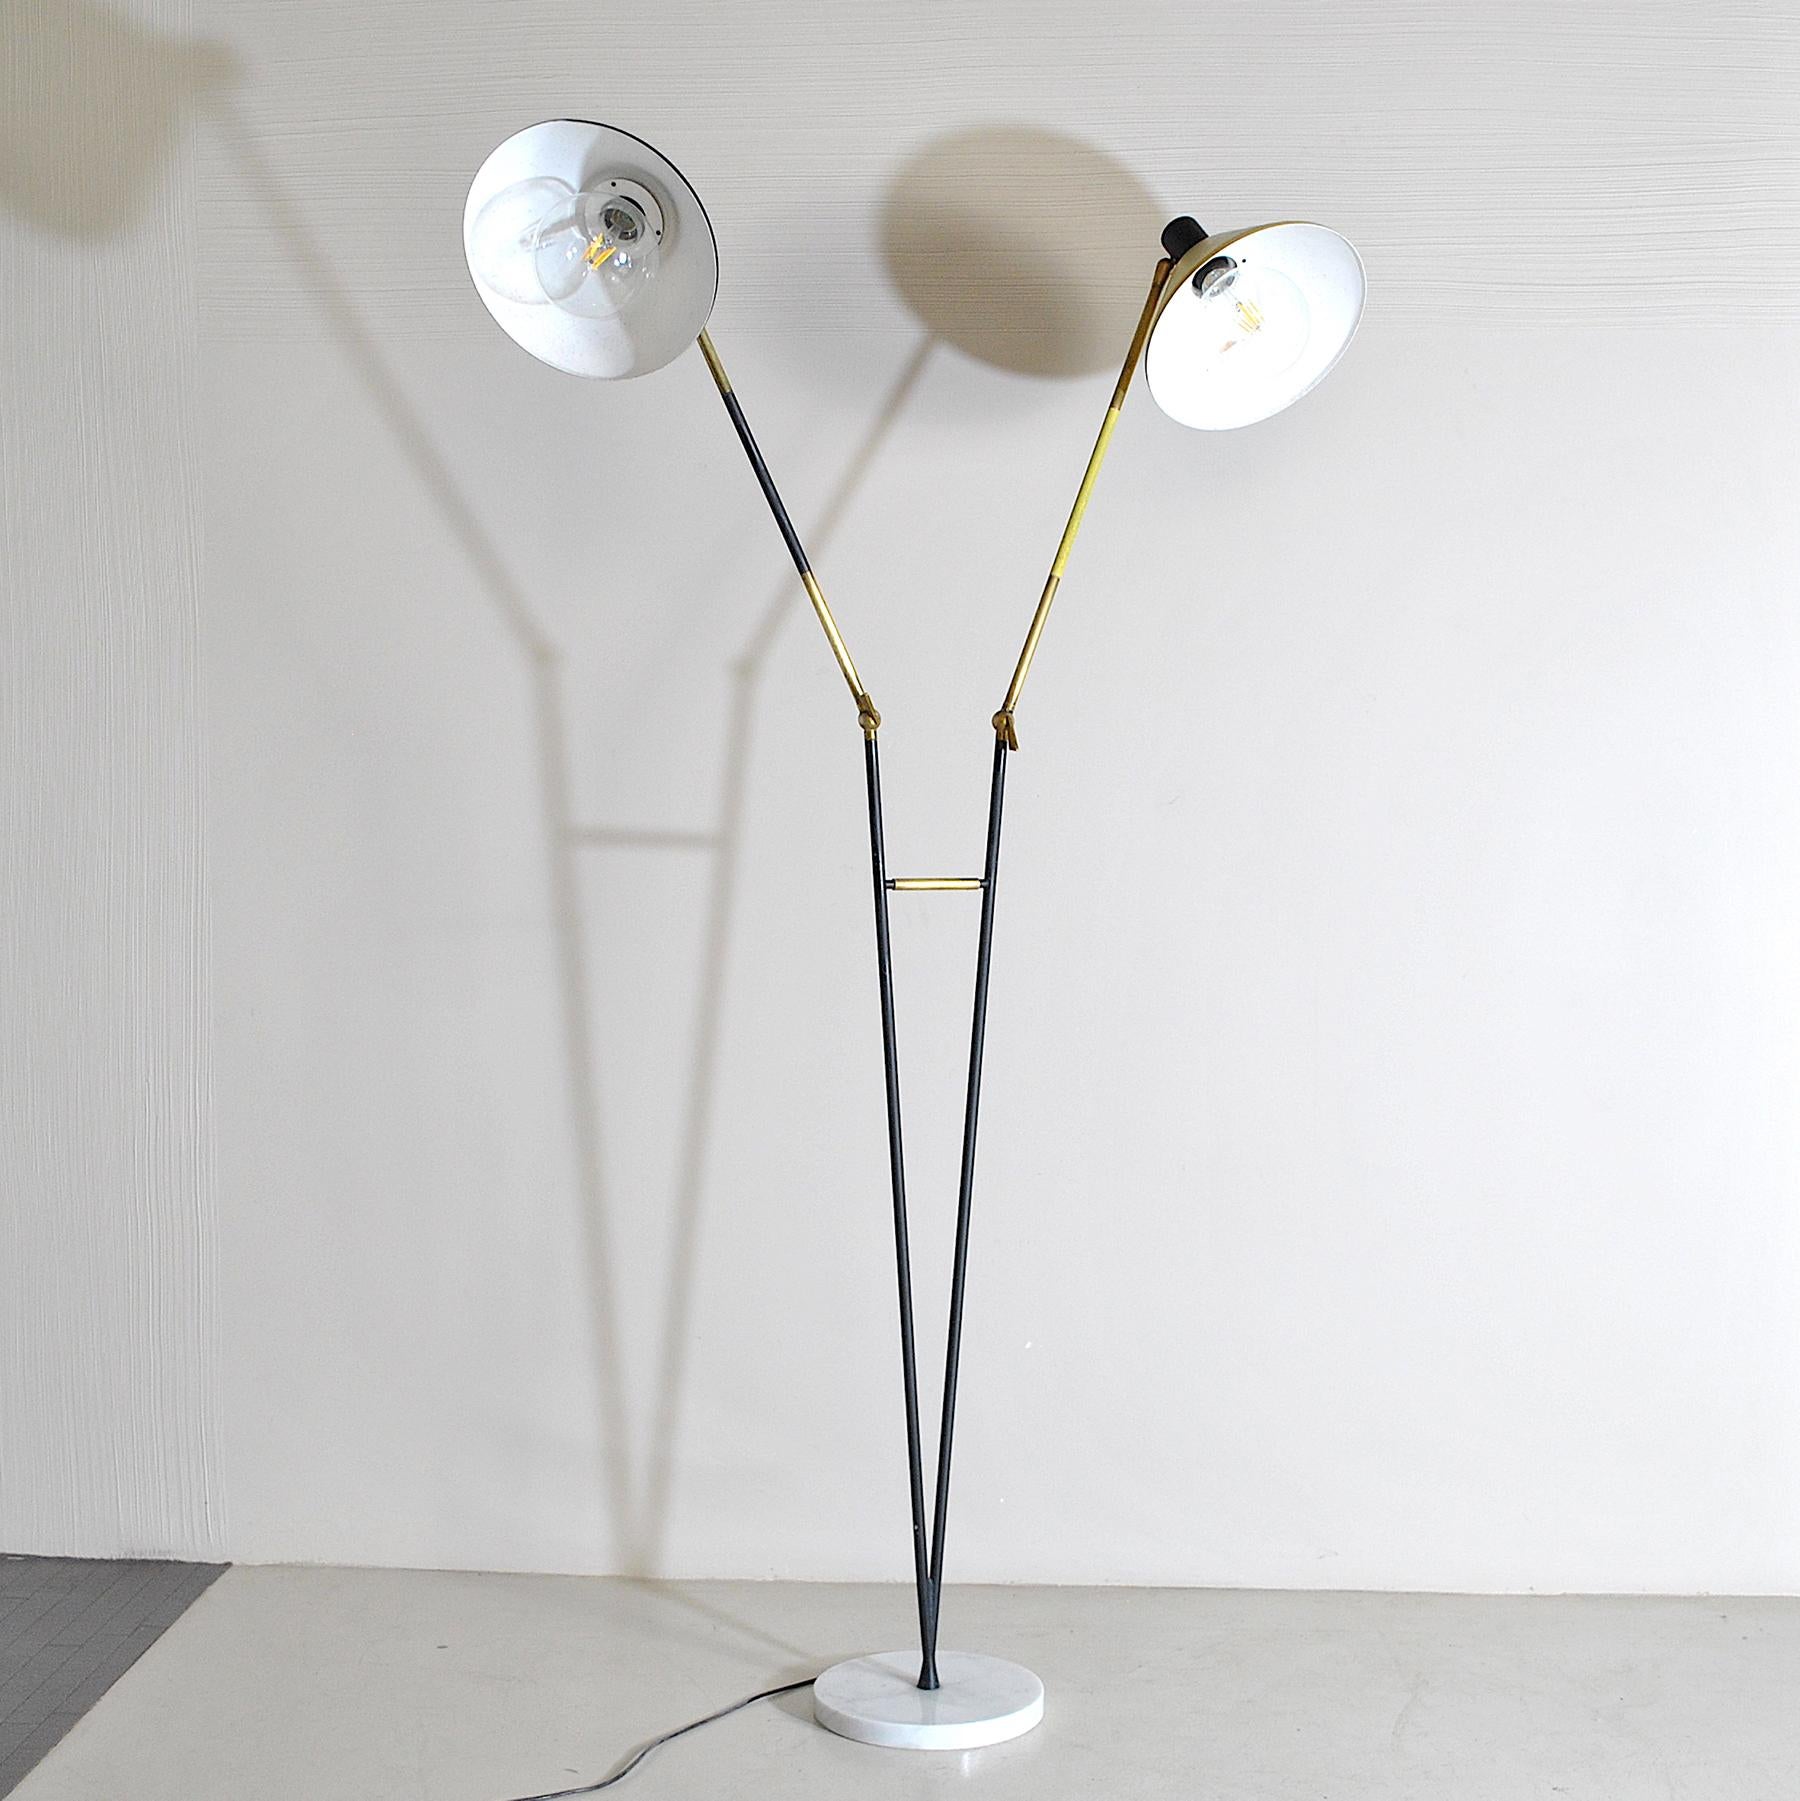 Superb double cone floor lamp with marble base produced by Stilux from the 1950s, a must for period lighting and vintage lighting now.

Stilux was one of the most innovative lighting design companies in Italy during the mid-century. Their projects